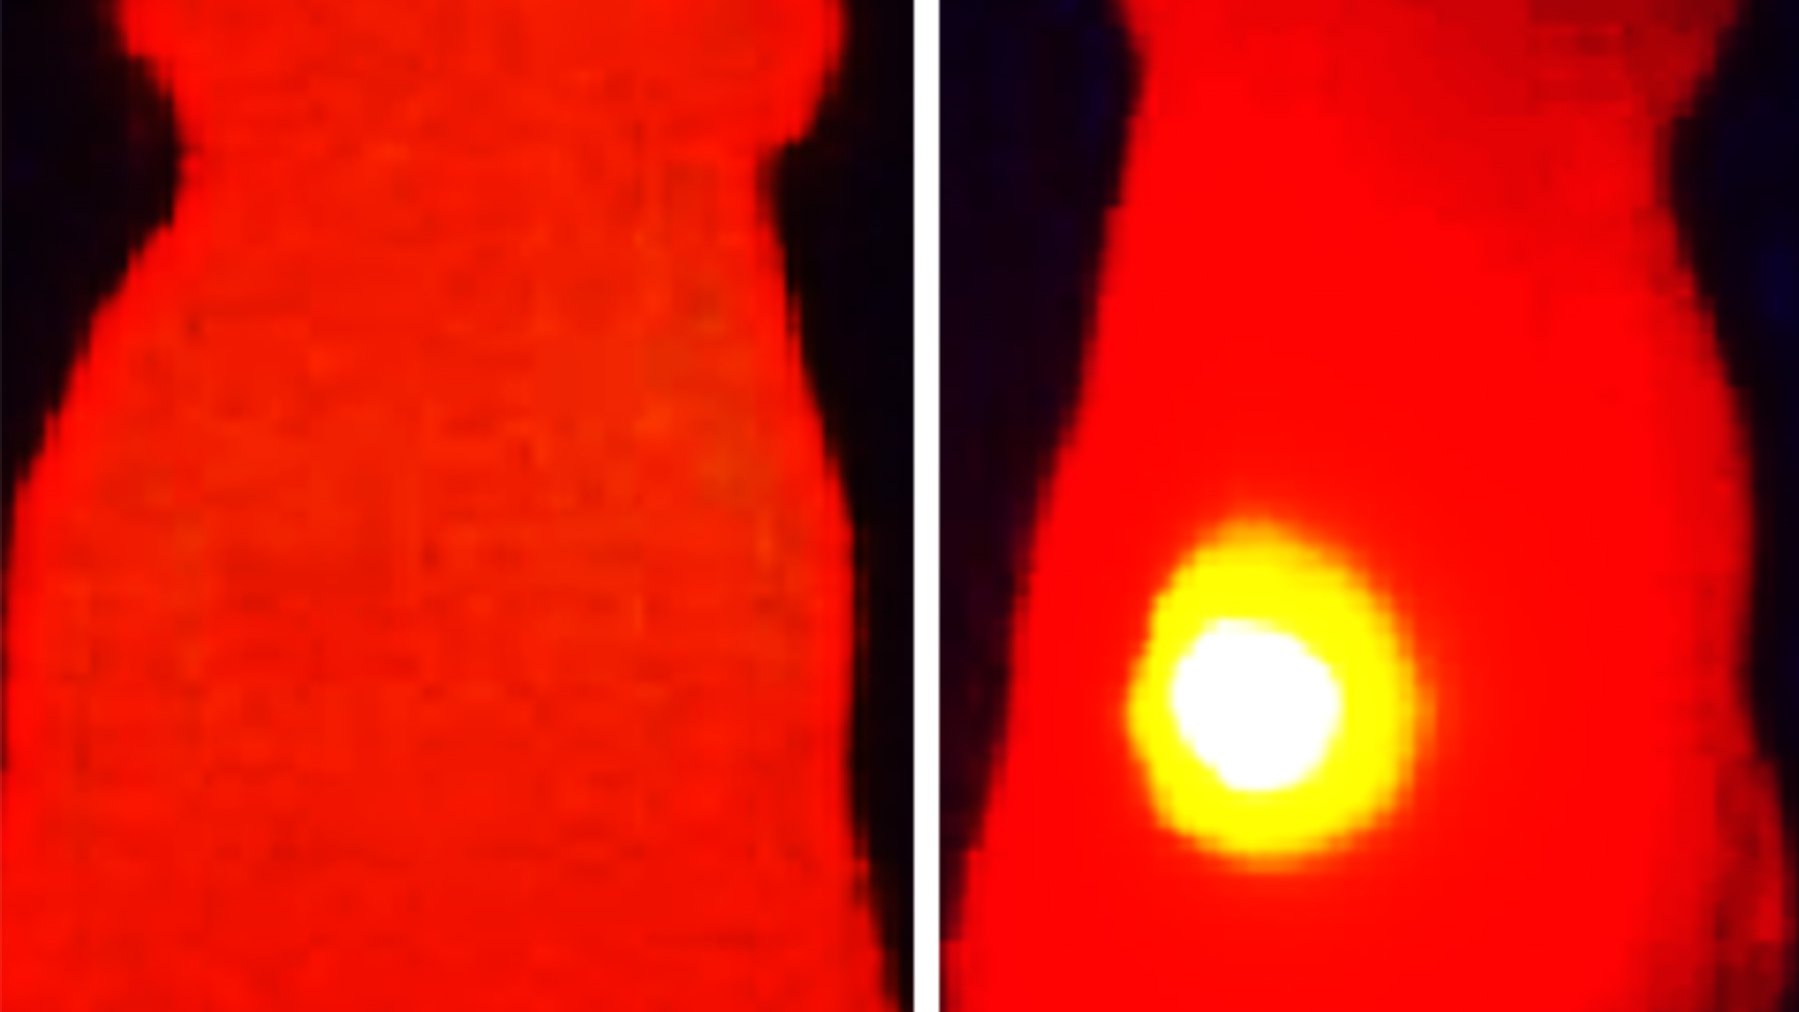 Infrared thermal images show elevated tumor (yellow) temperature in mice after laser irradiation in with OMV-melanin treated mice (right image). The image on the left shows a mouse treated with OMVs without melanin.